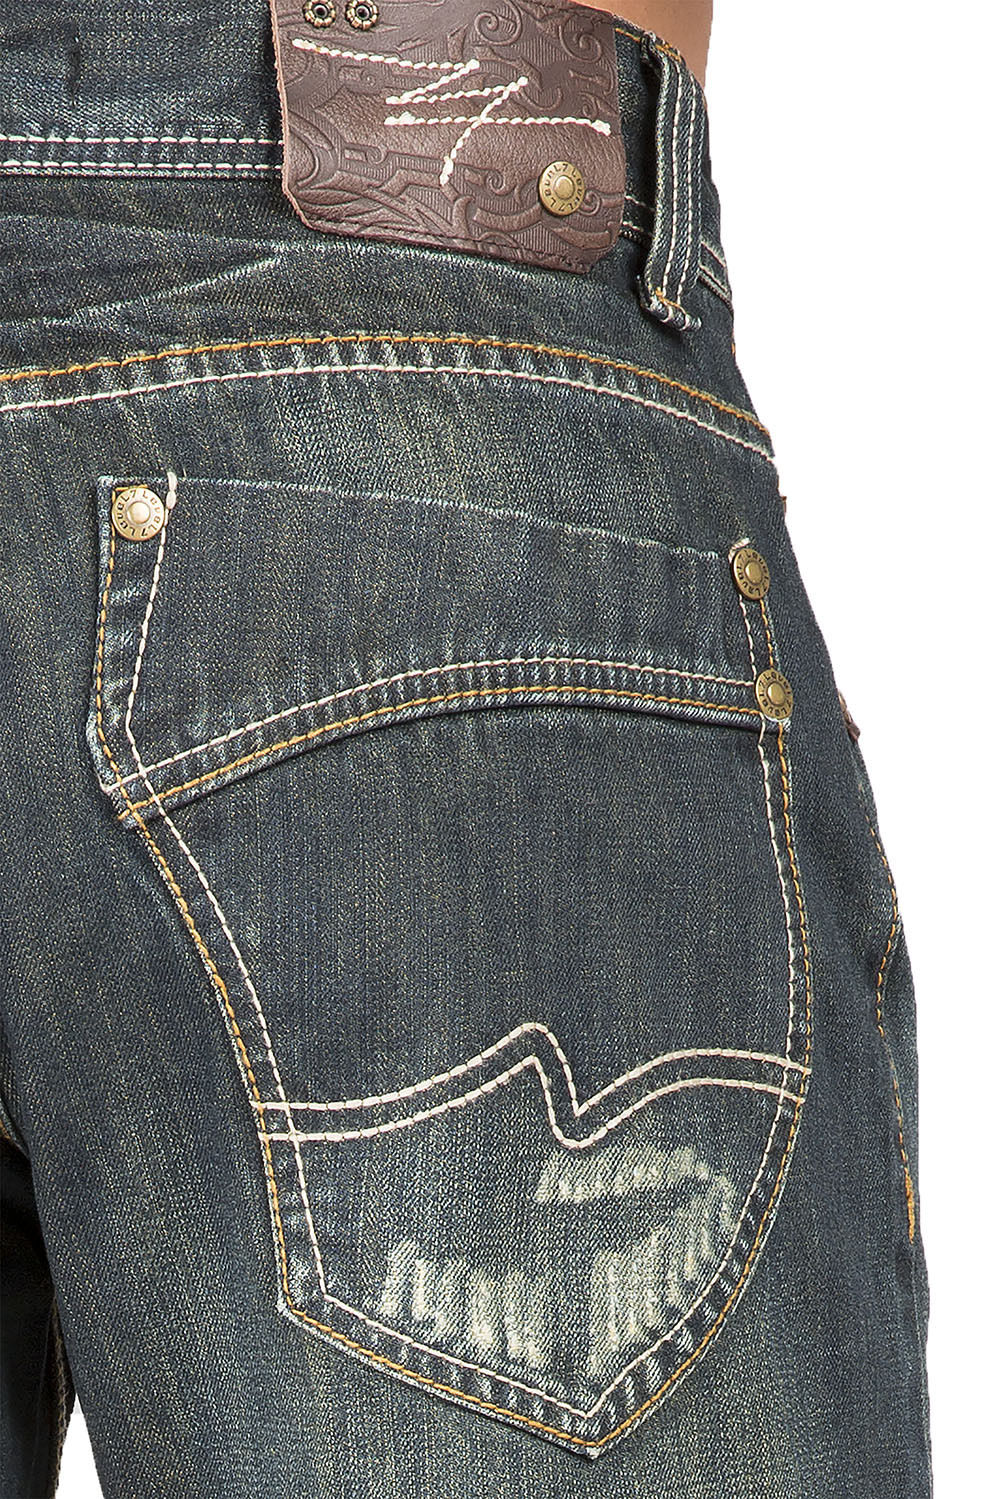 Relaxed Straight Ripped Faded Vintage Premium Denim Signature 5 Pocket Jeans Wrinkle Whisker